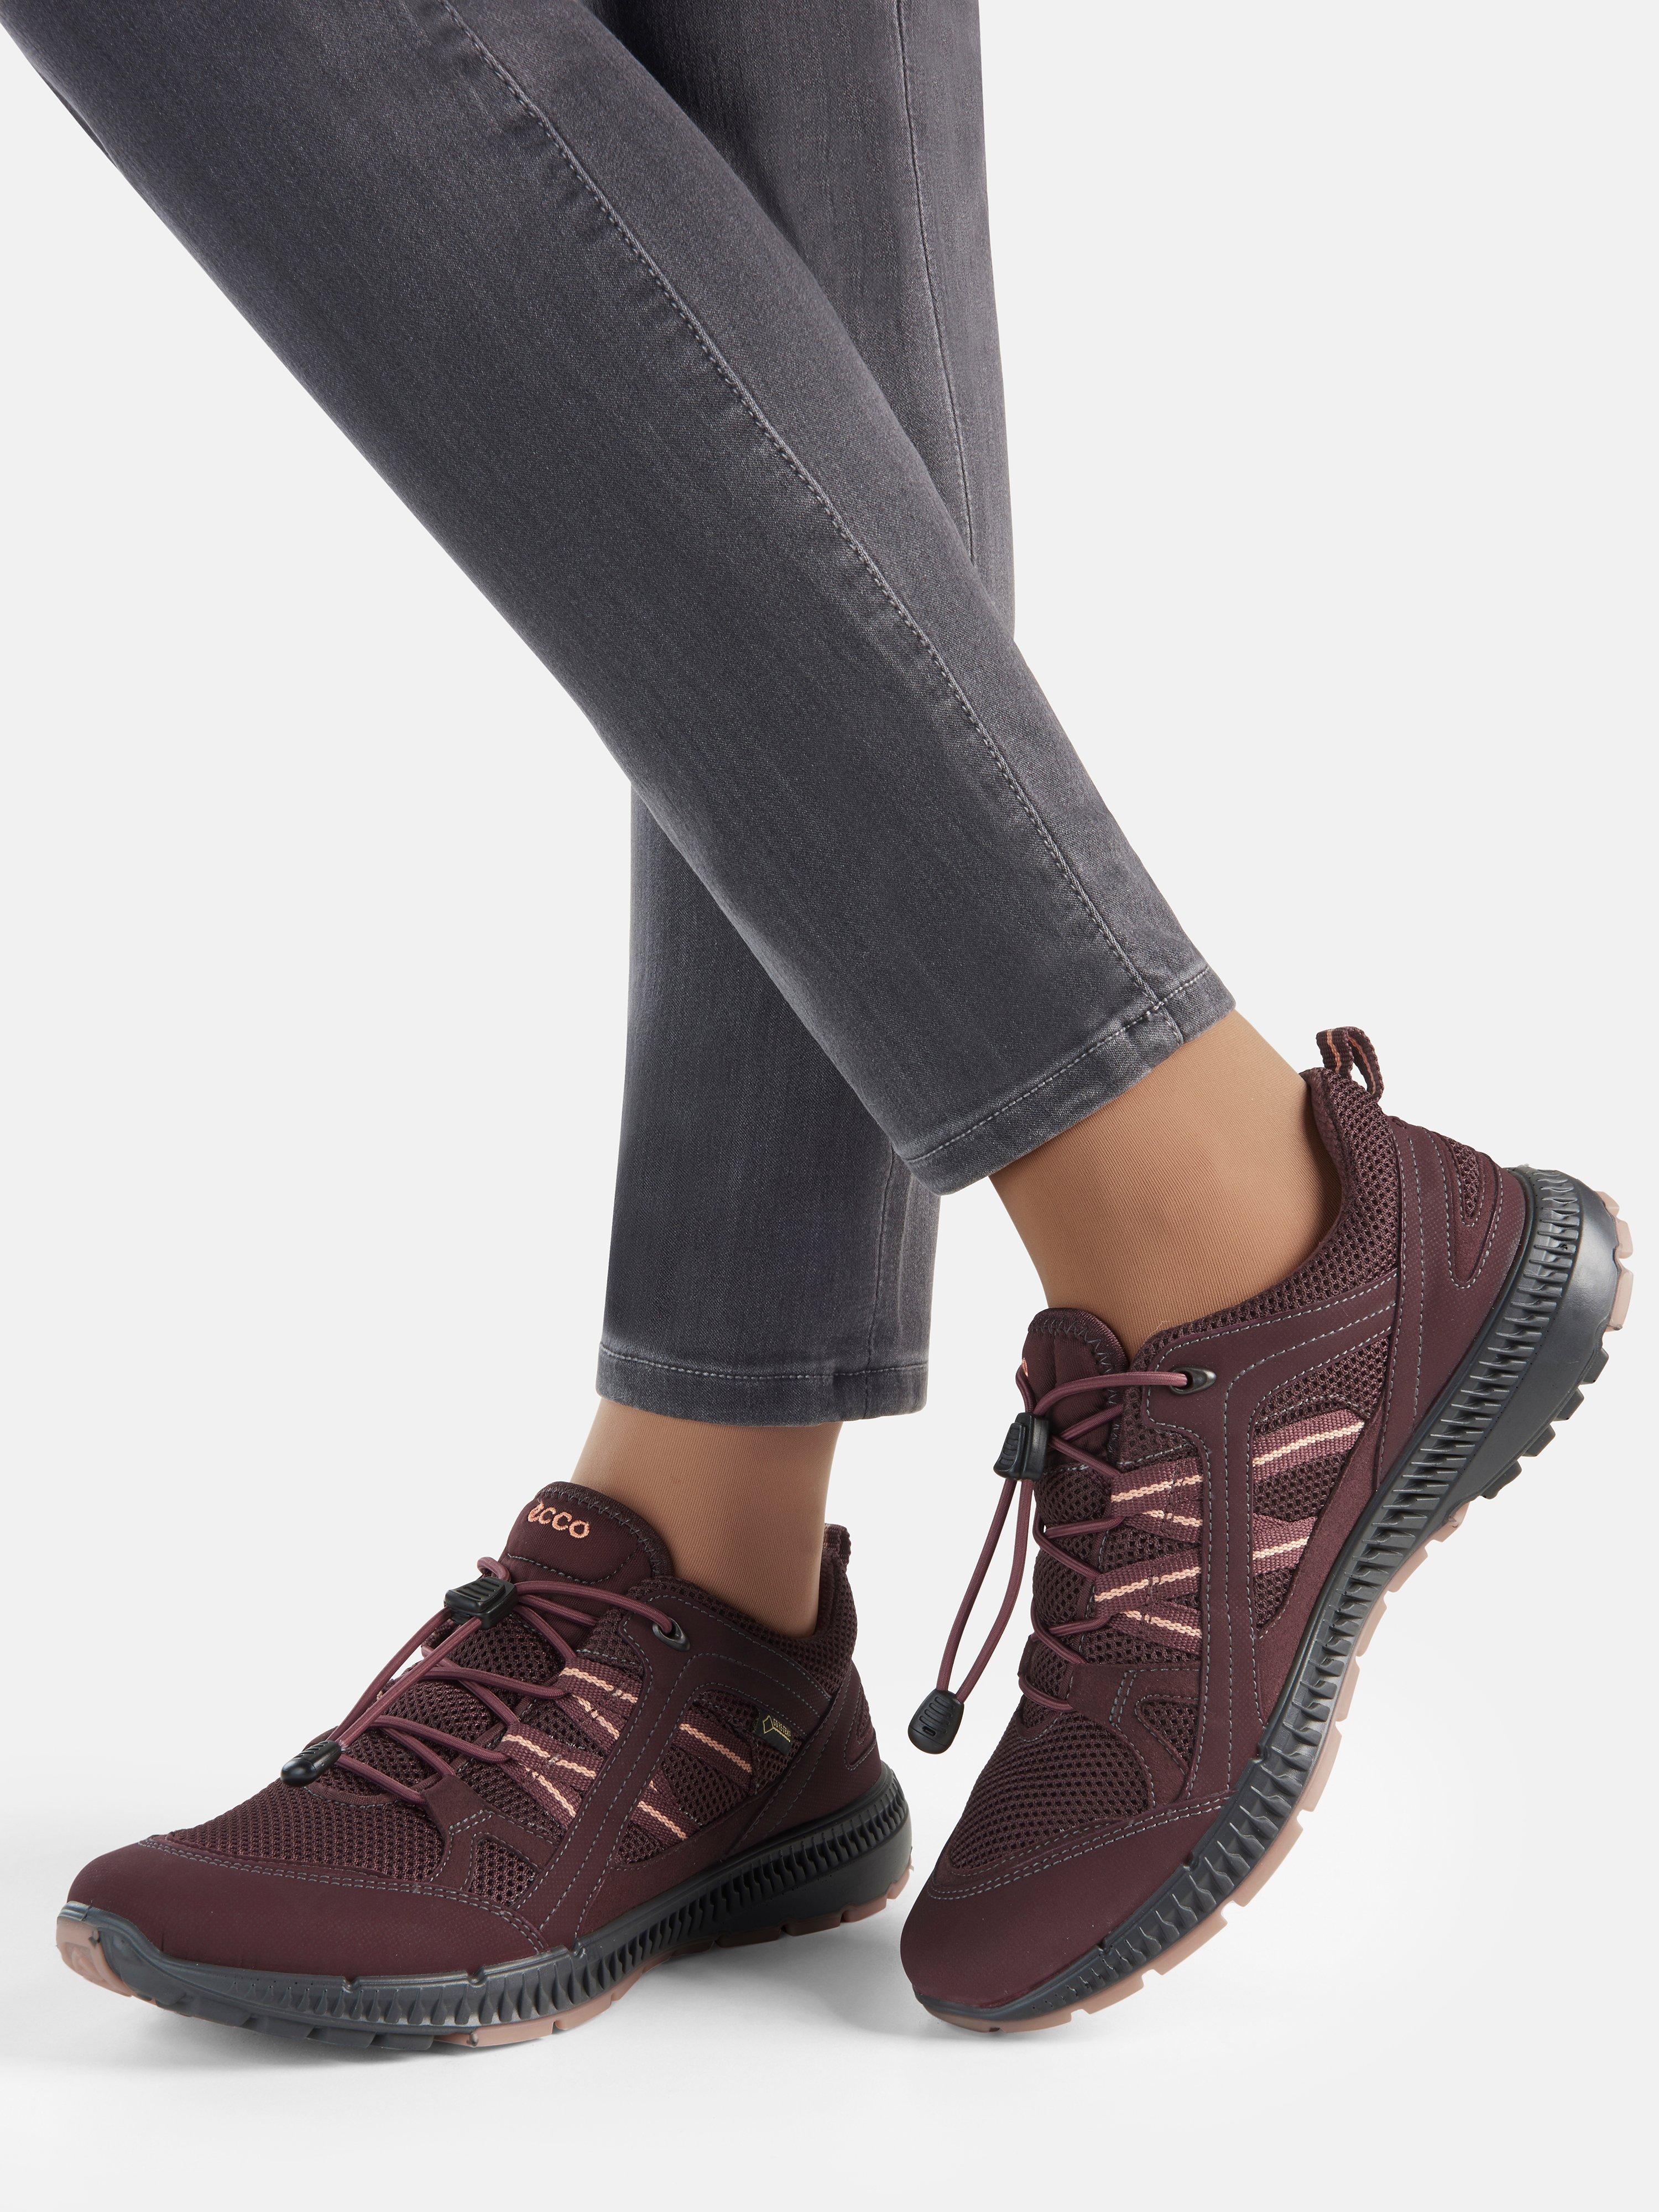 Ecco - Terracruise lace-up shoes - berry